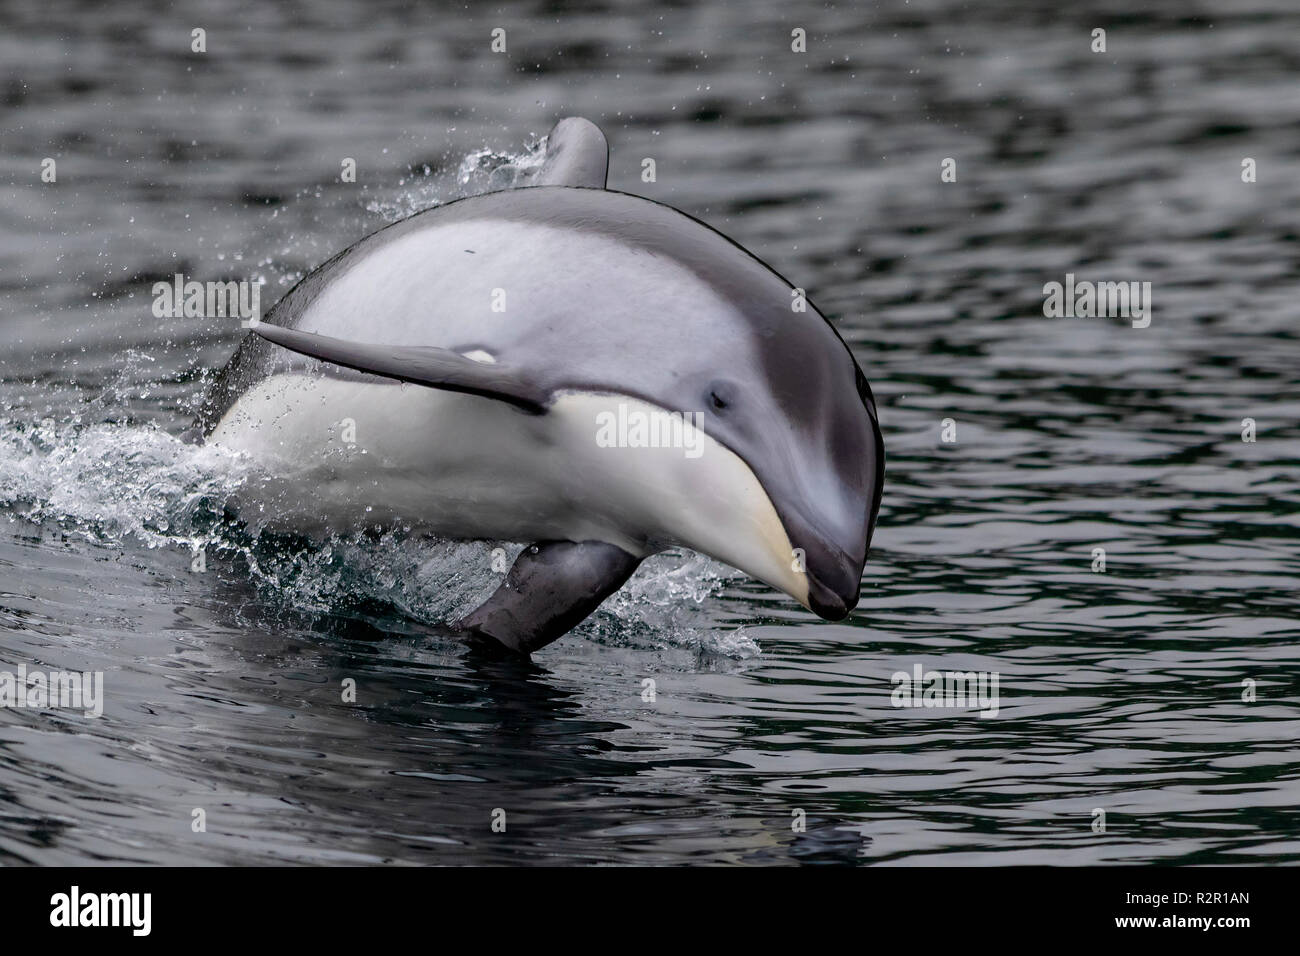 Pacific white-sided dolphin (Lagenorhynchus obliquidens) jumping in the Broughton Archipelago, First Nations Territory, British Columbia, Canada Stock Photo